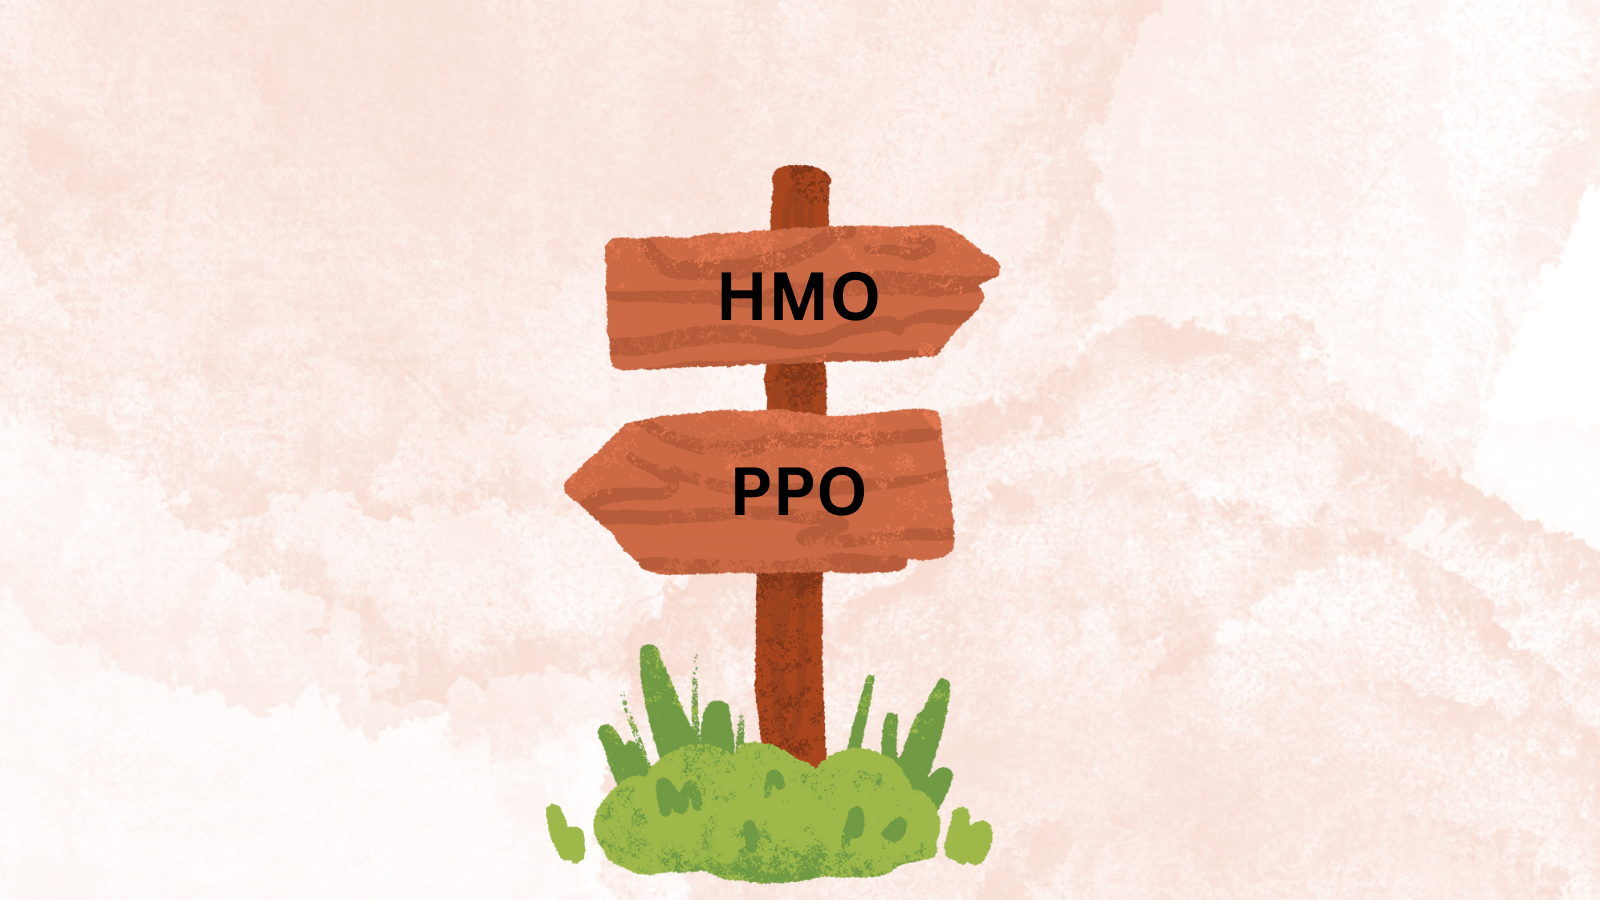 A cartoon signpost with HMO and PPO pointing in opposite directions